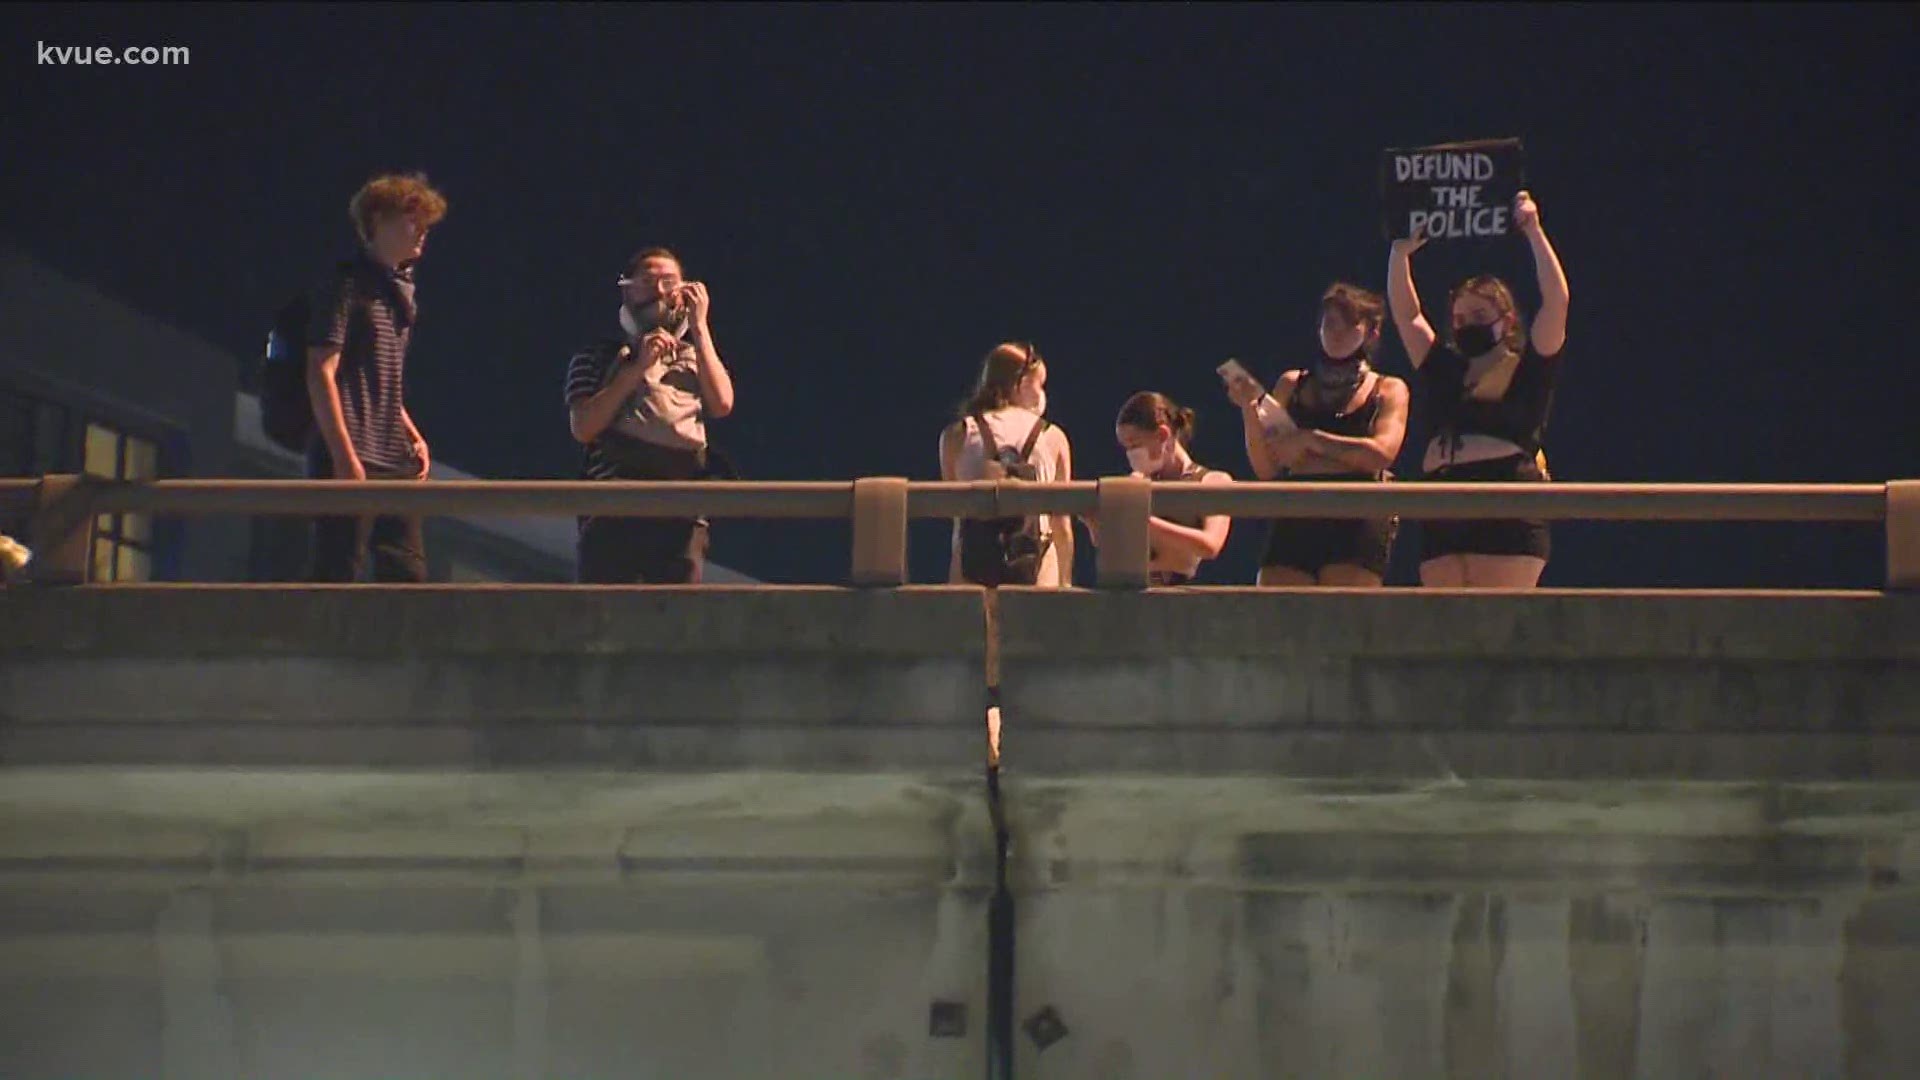 Protesters marched on Interstate Highway 35 at one point on Saturday night.